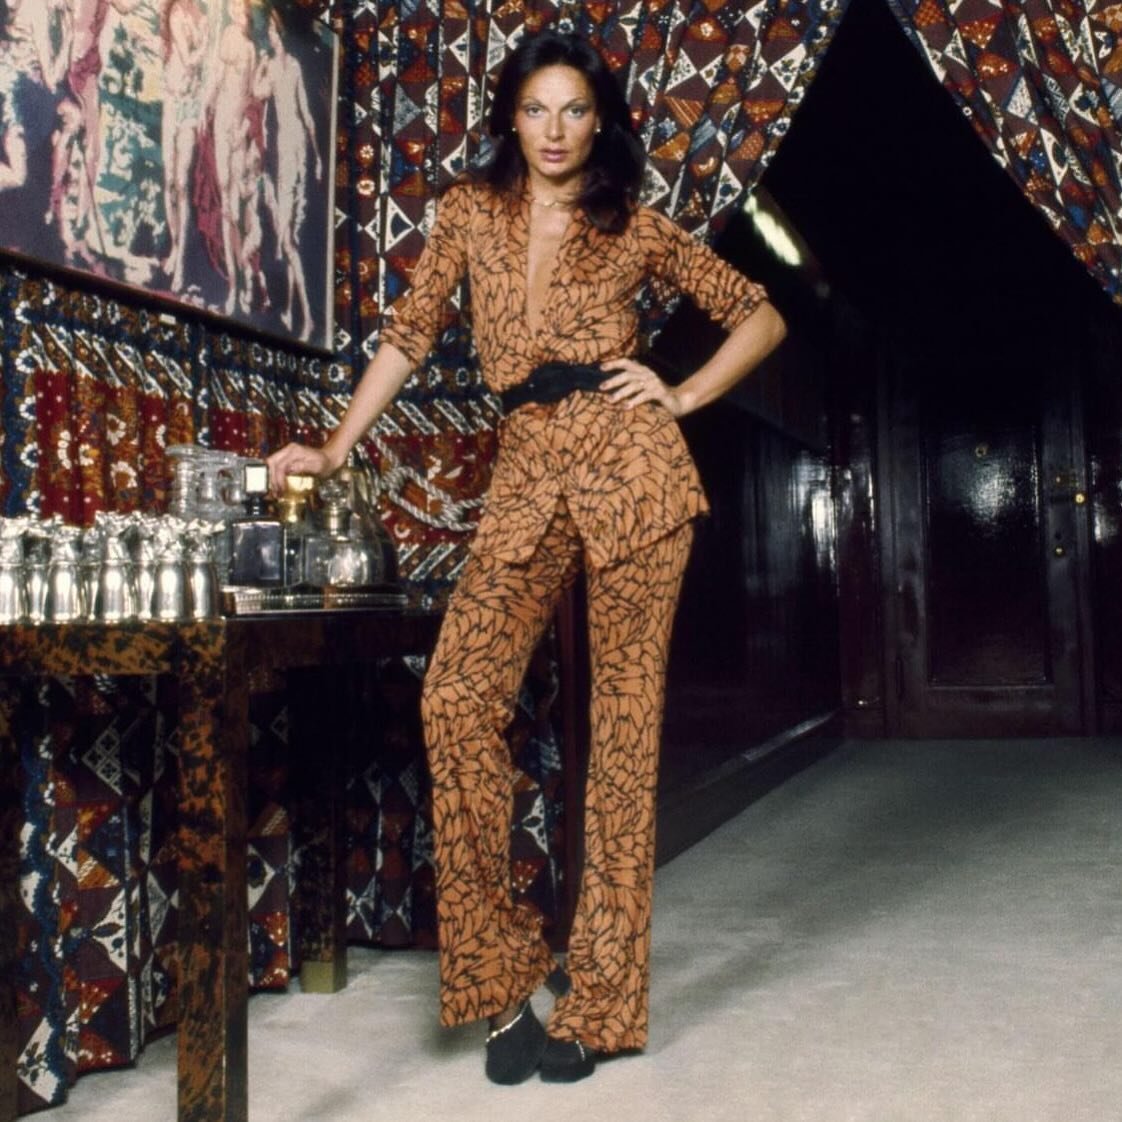 Diane circa 1970 in a fit we would wear today. #dianevonfurstenberg #femaledesigners